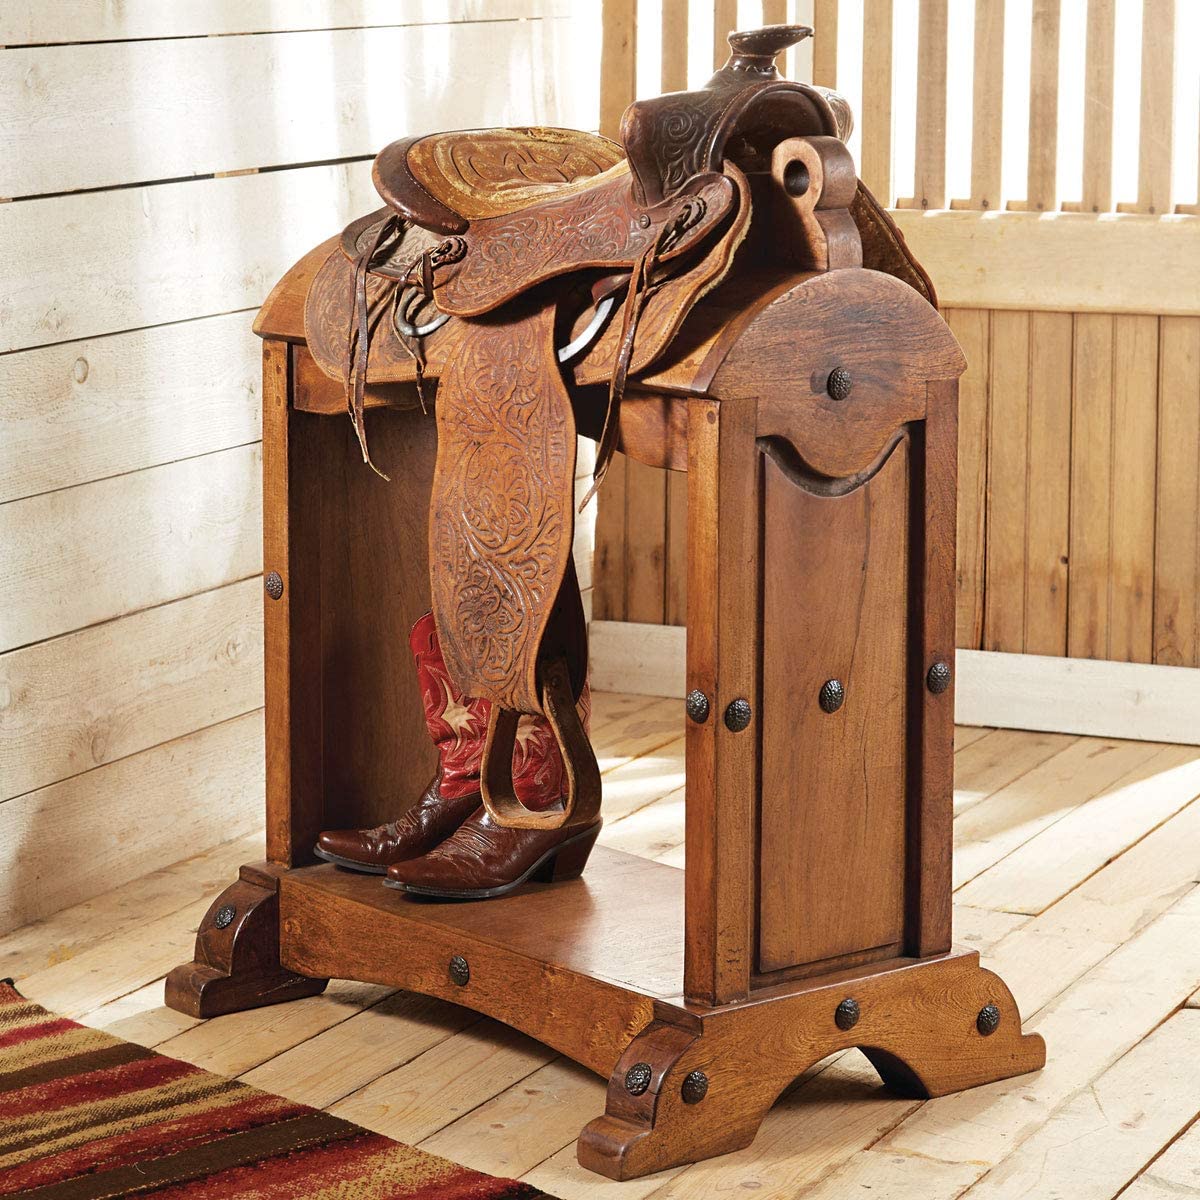 Mesquite saddle stand